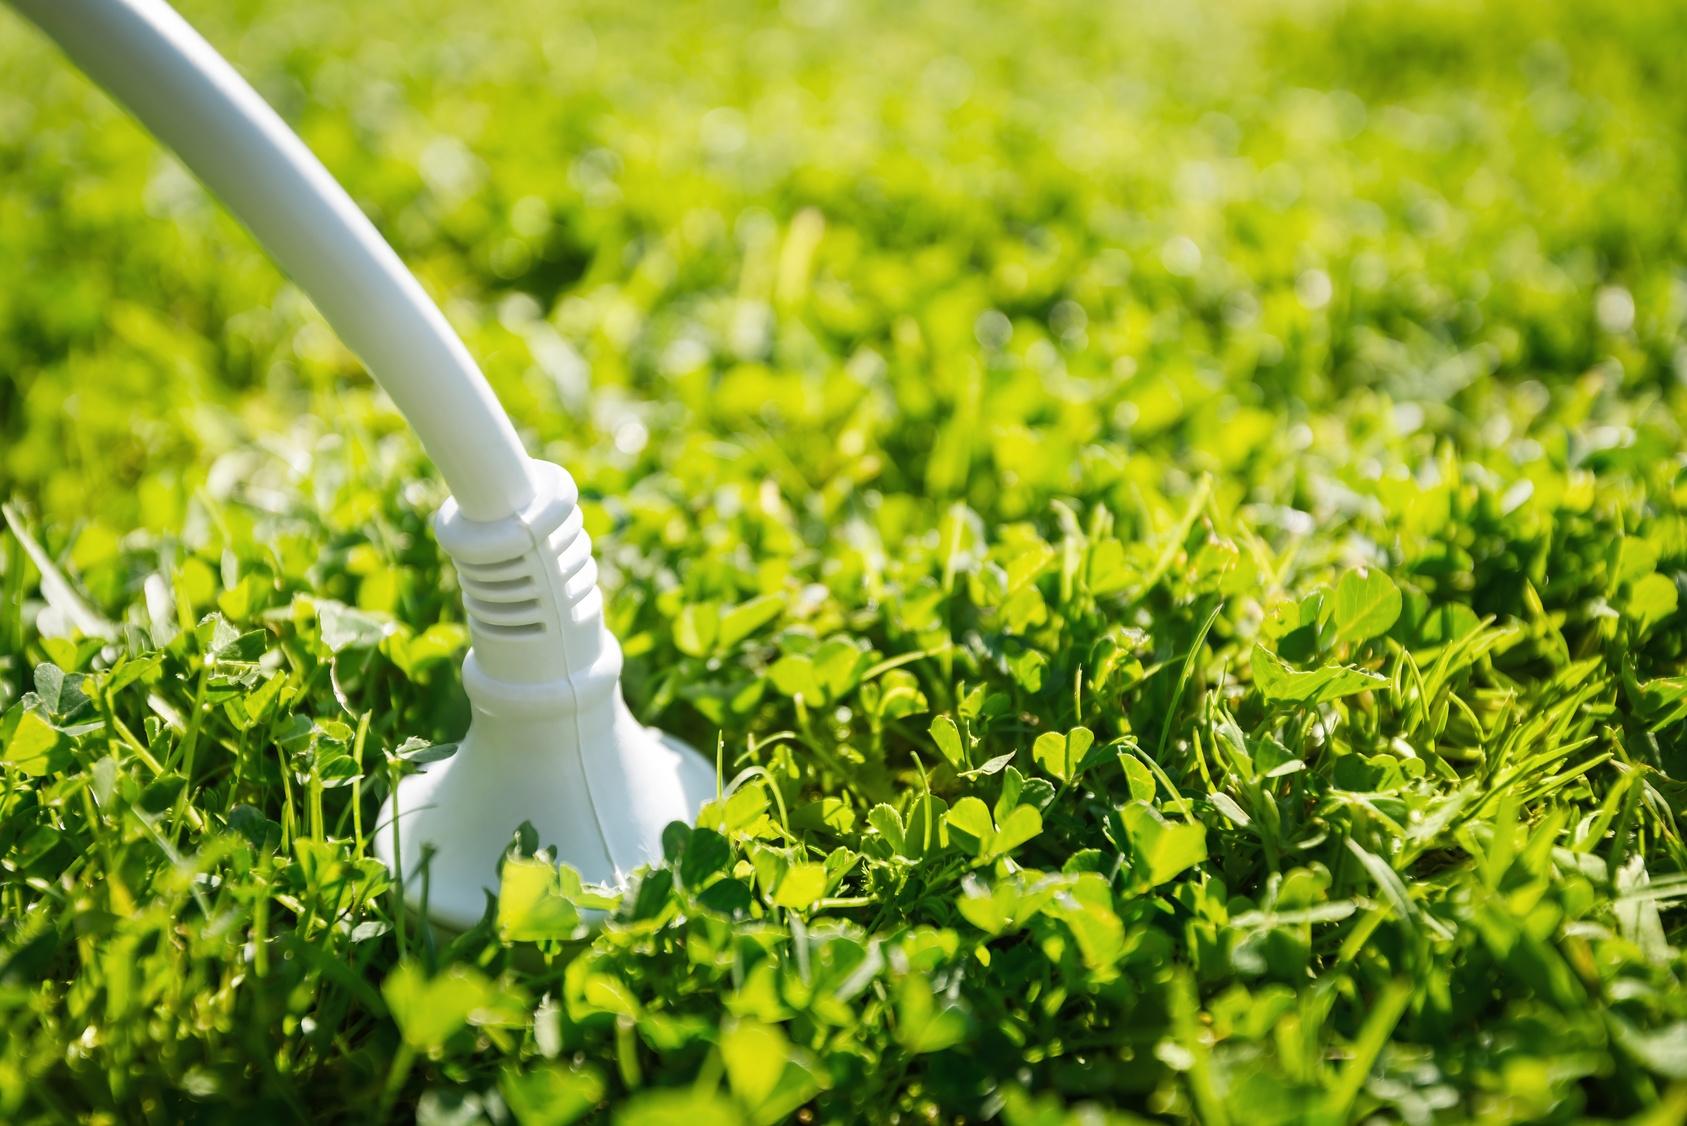 a white cord connected to an electric plug in the grass